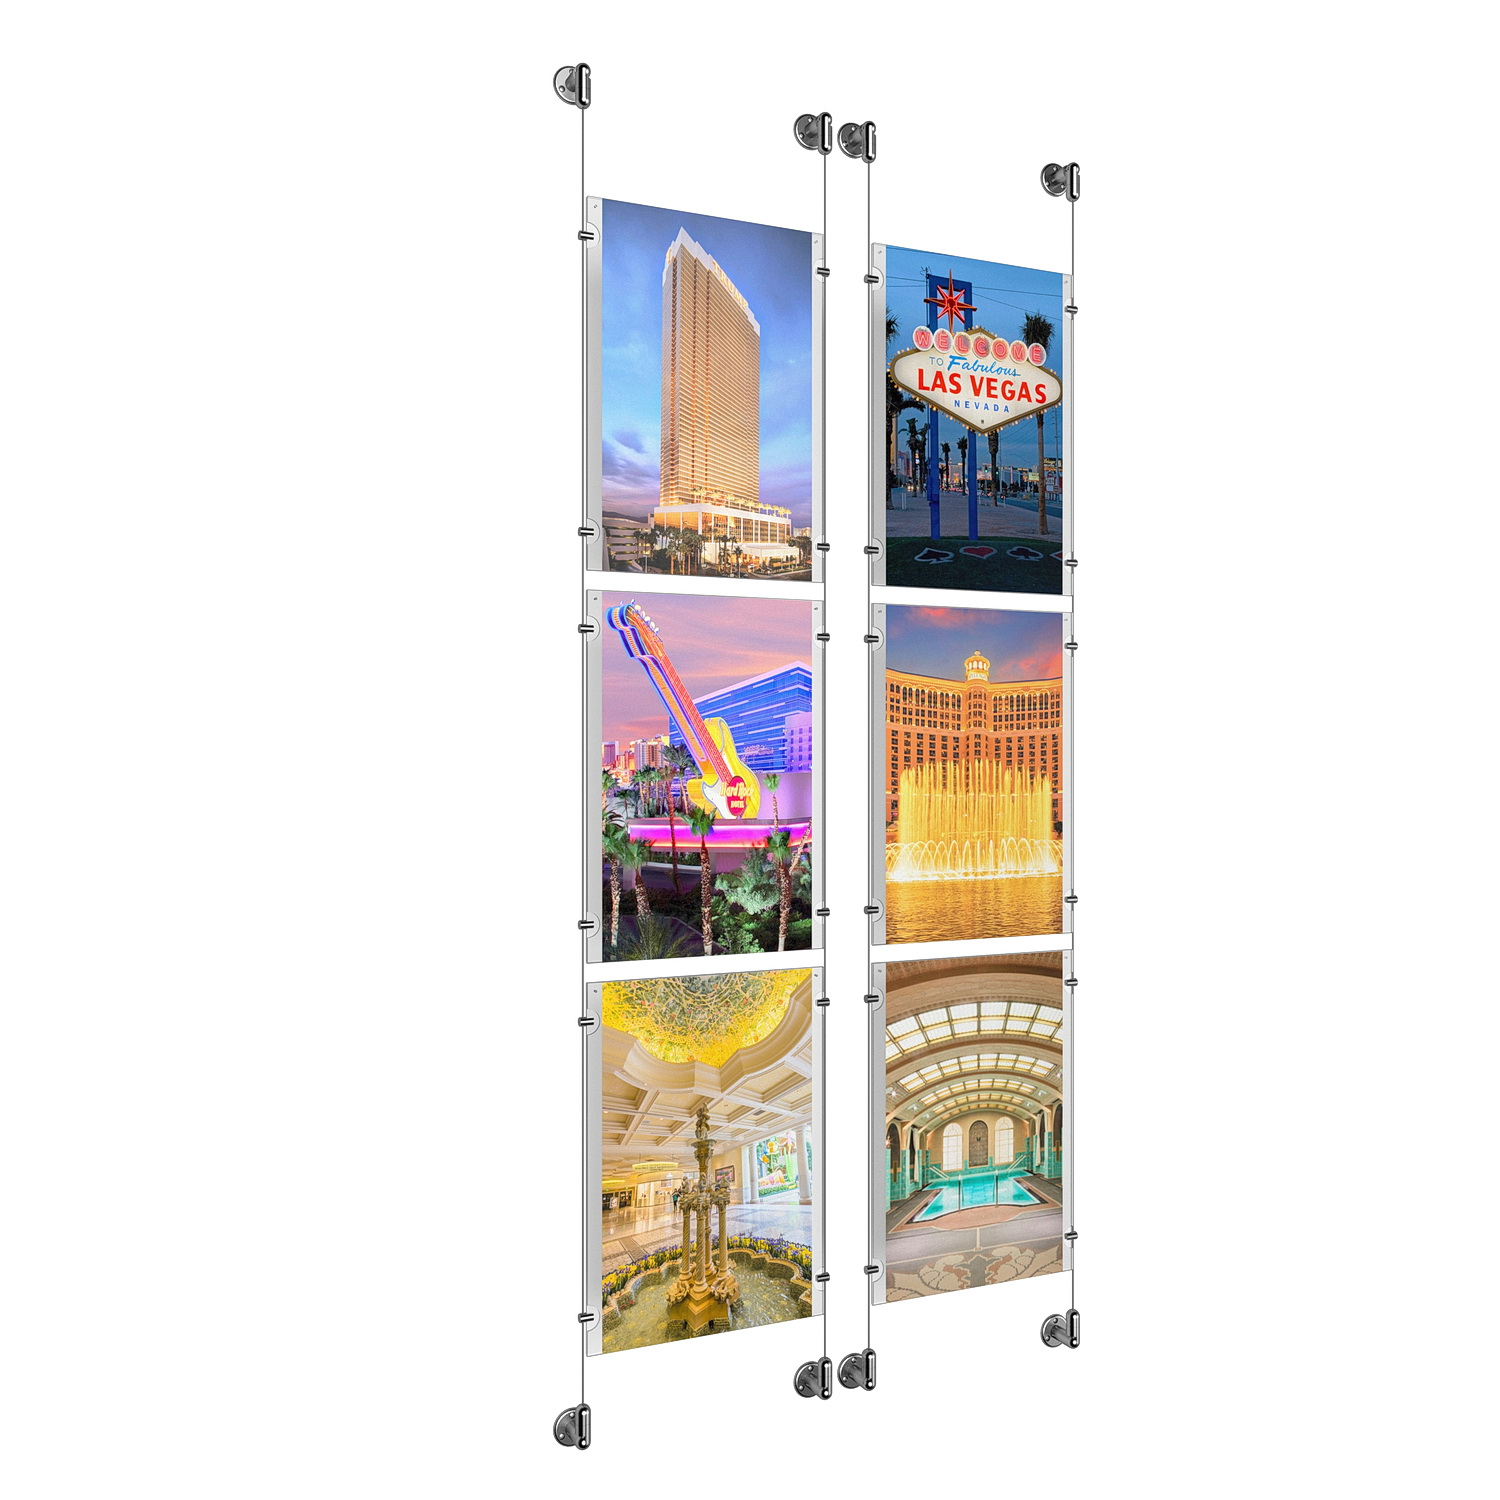 (6) 11'' Width x 17'' Height Clear Acrylic Frame & (4) Aluminum Clear Anodized Adjustable Angle Cable Systems with (24) Single-Sided Panel Grippers